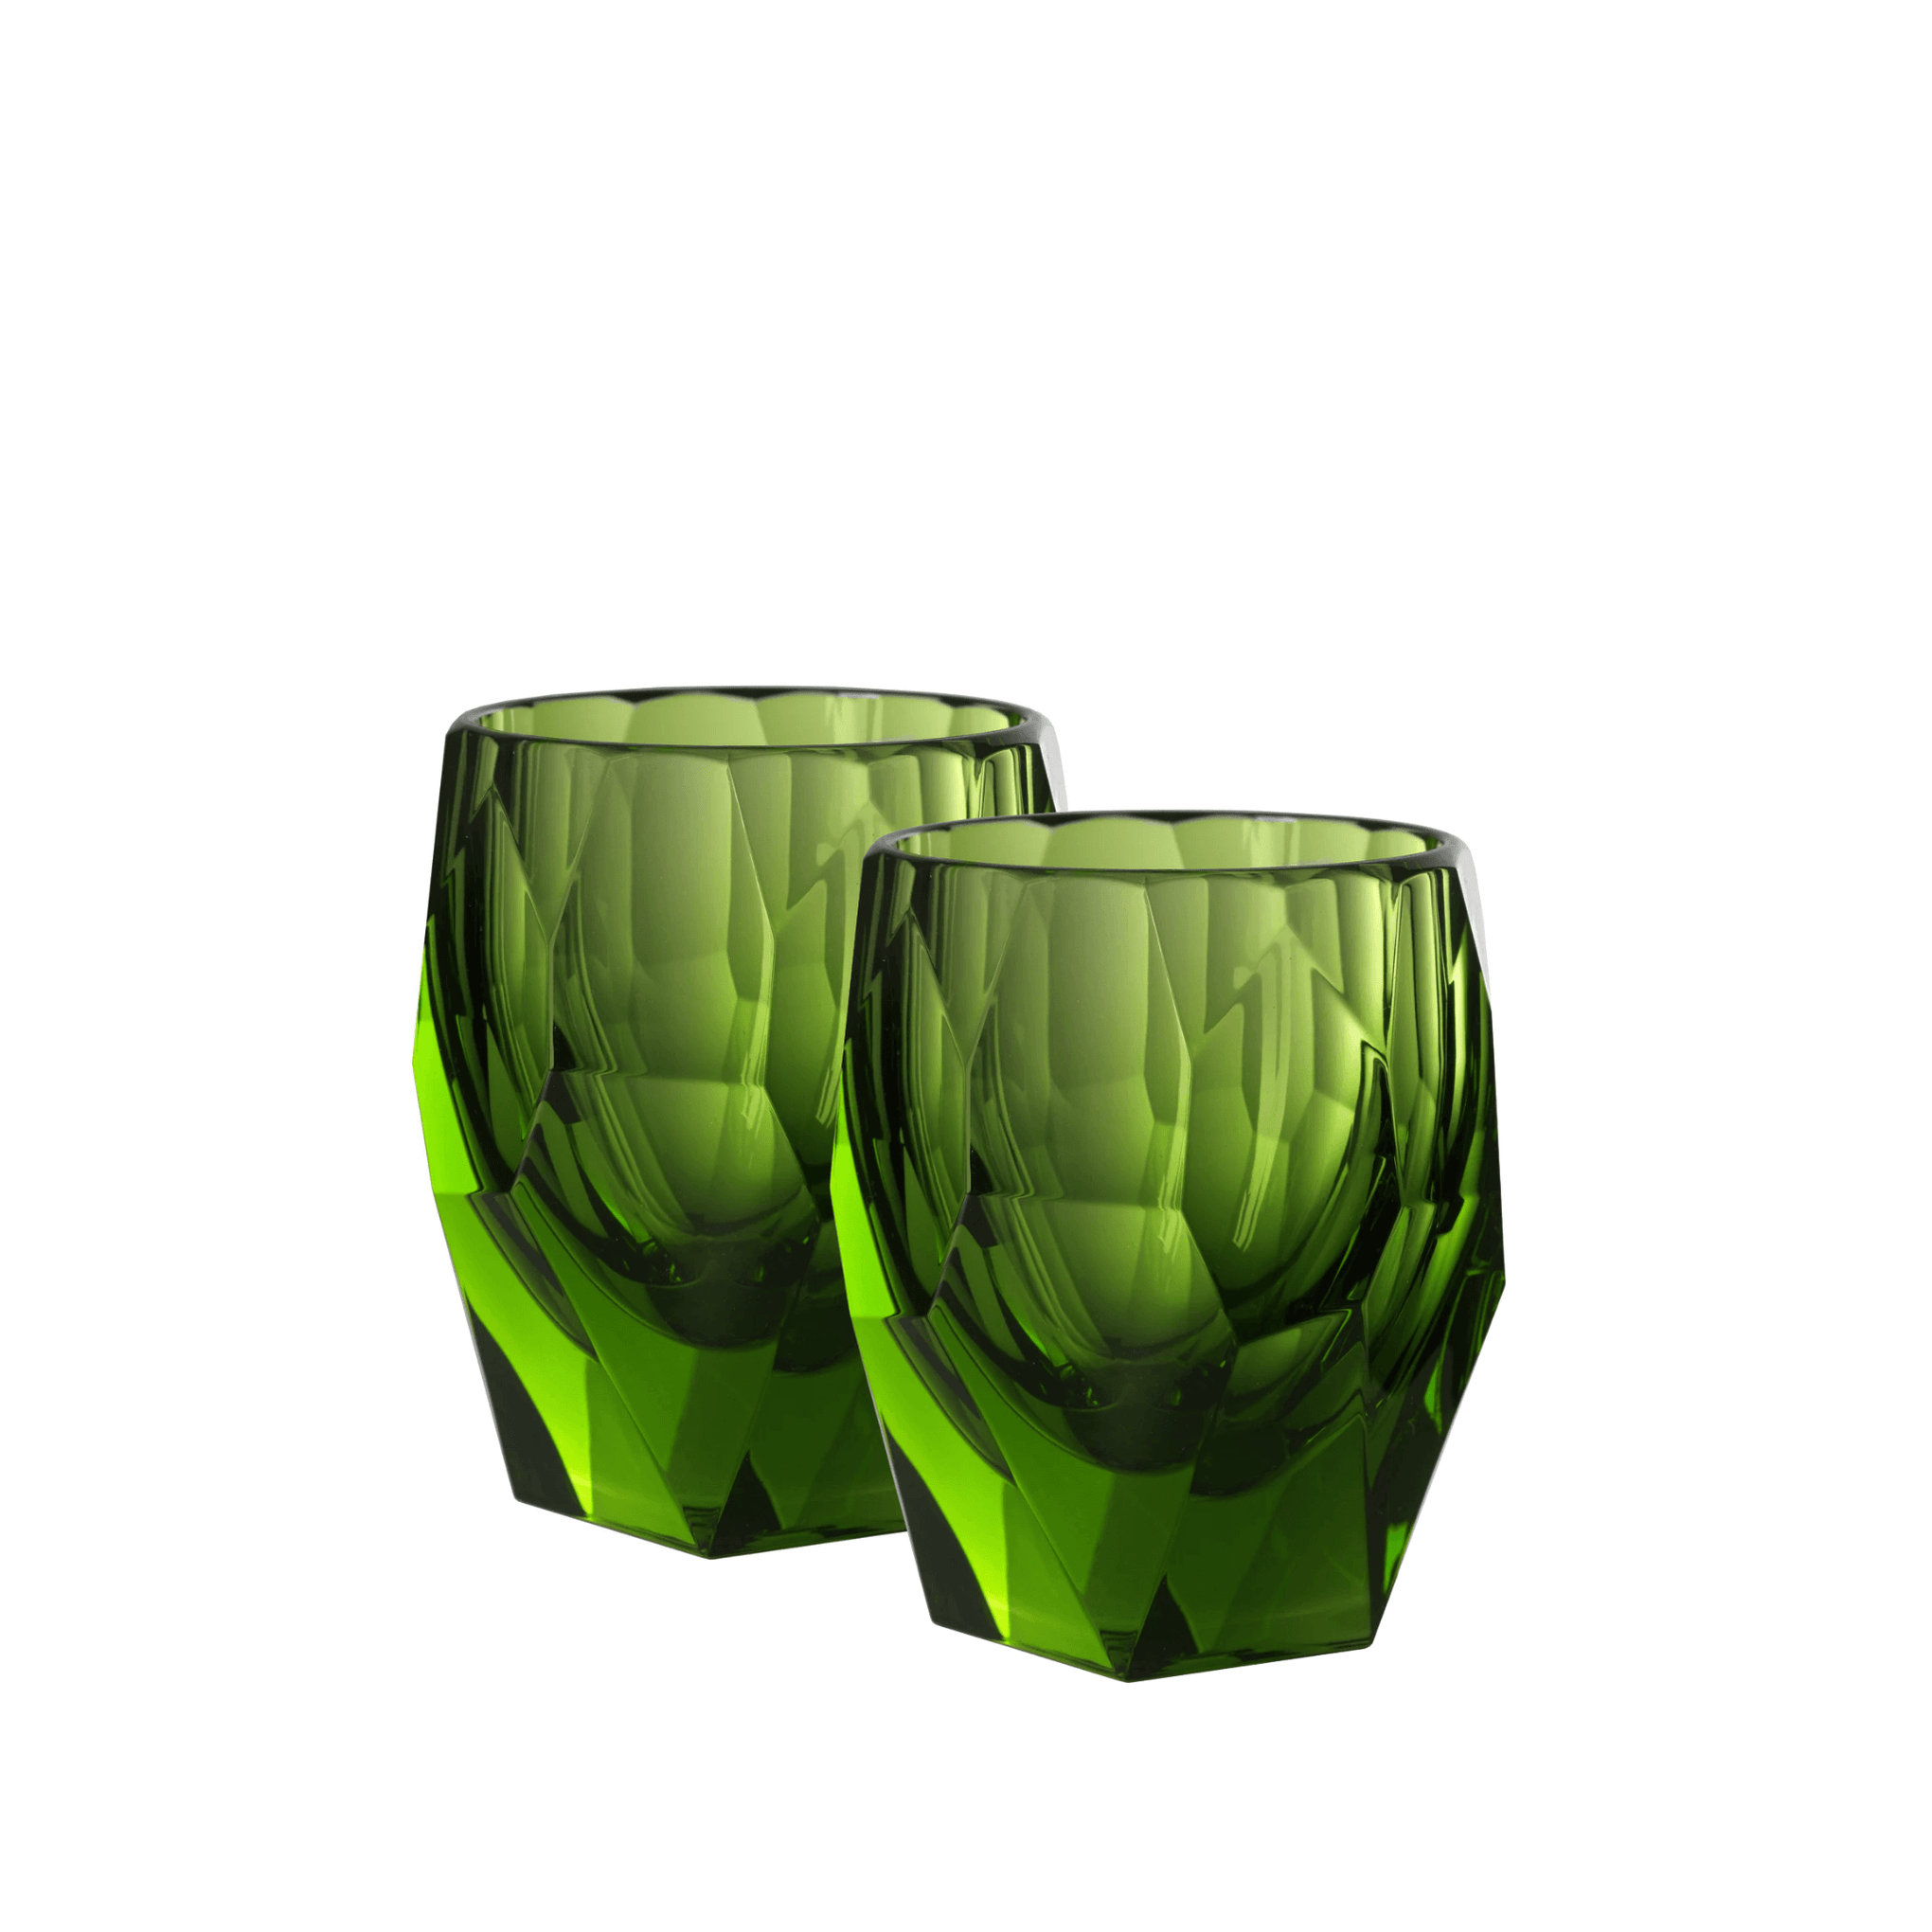 Super Milly Tumbler pistachio green outdoor dining